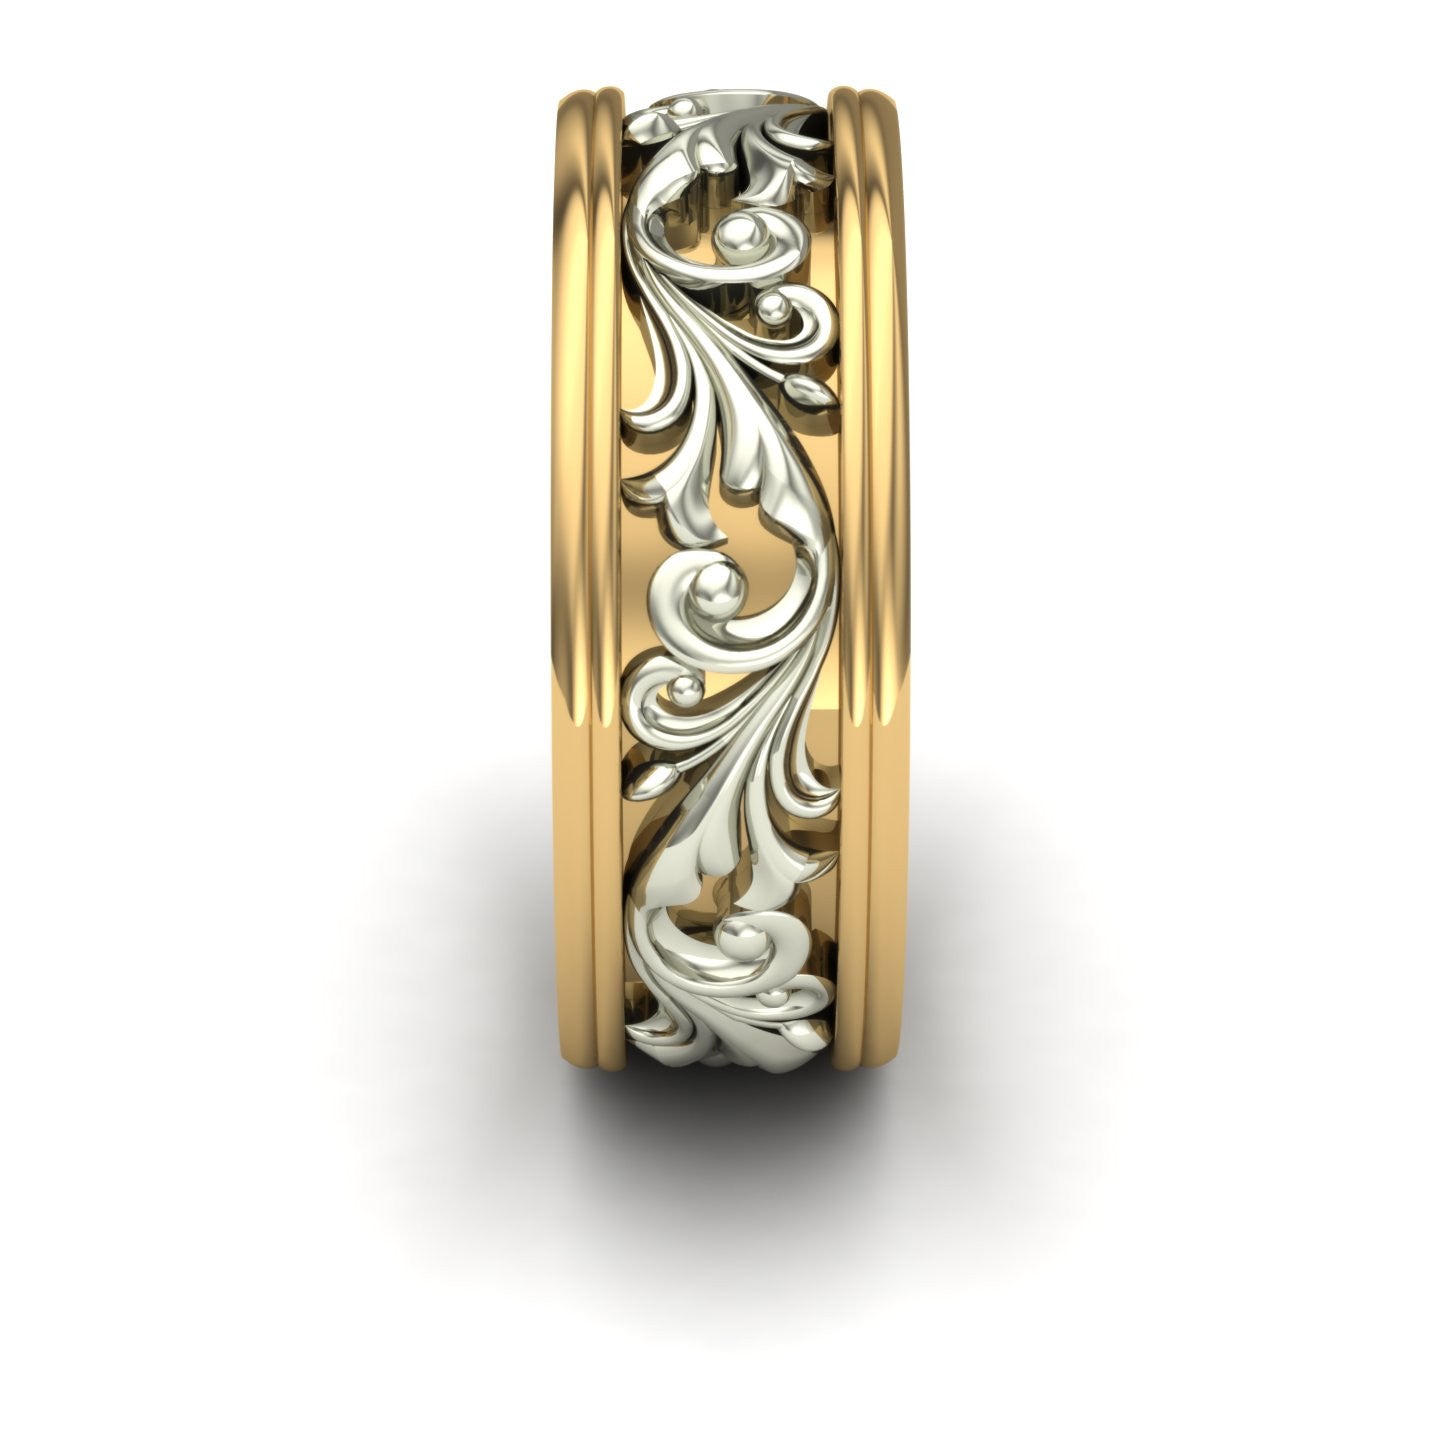 gents wide two tone scroll wedding band in 14k yellow and white gold - Charles Babb Designs - side view